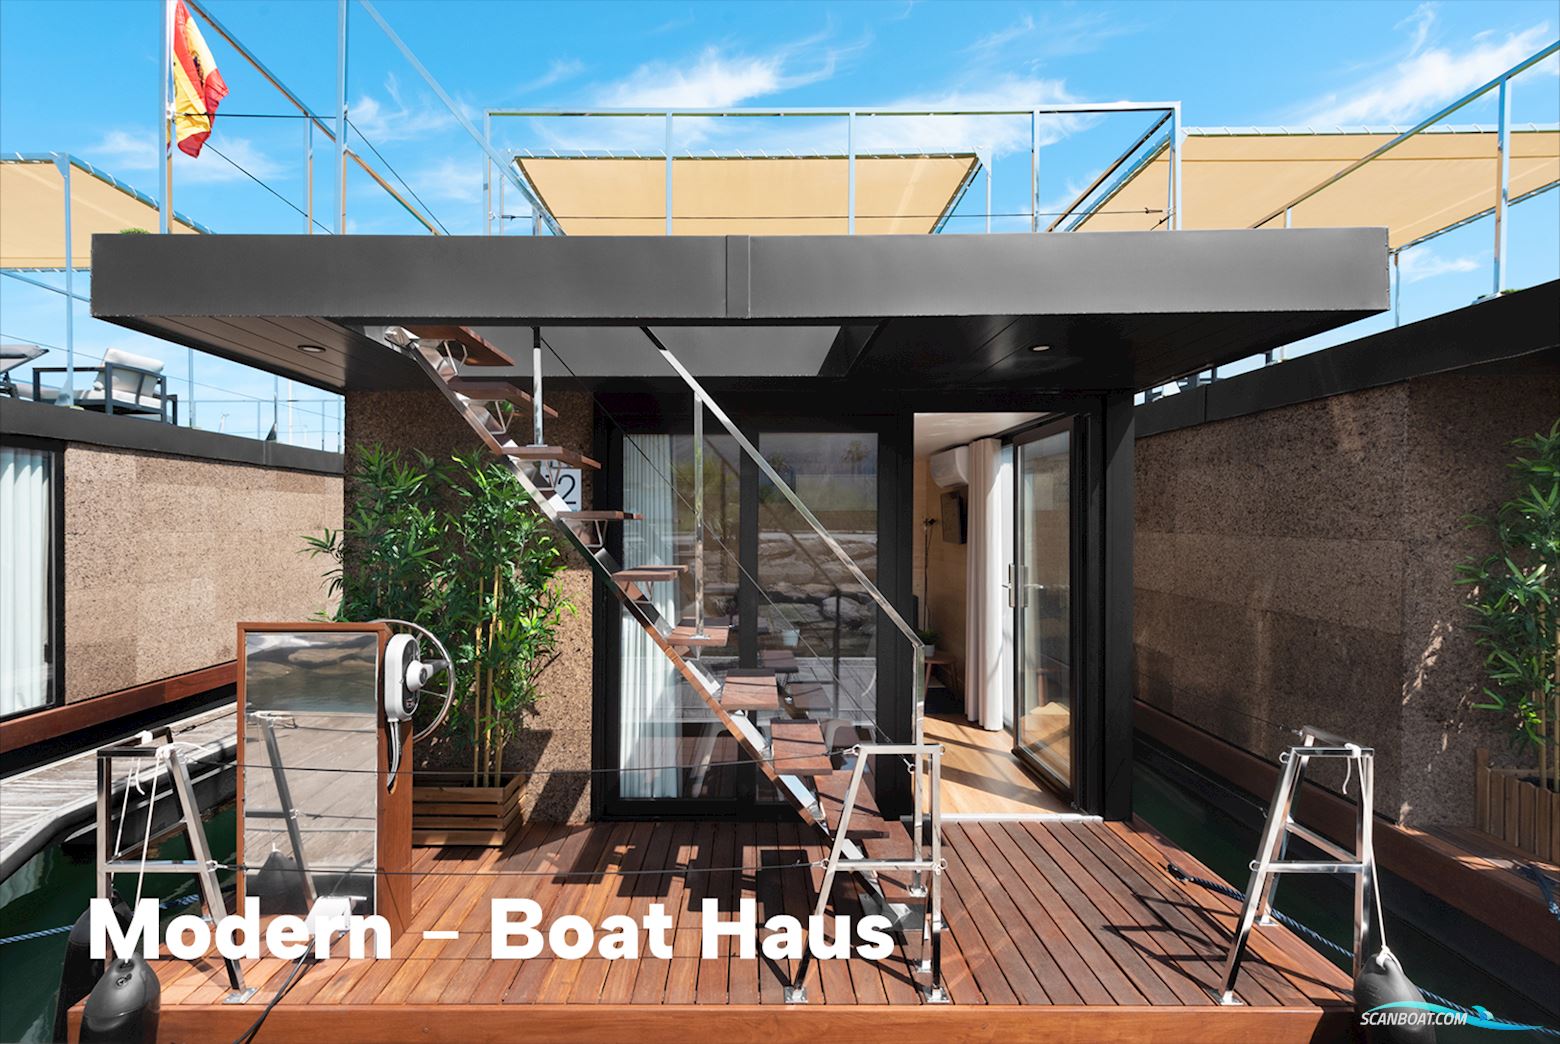 Boat Haus Mediterranean 8X4 Modern Houseboat Live a board / River boat 2023, with Yamaha engine, Spain